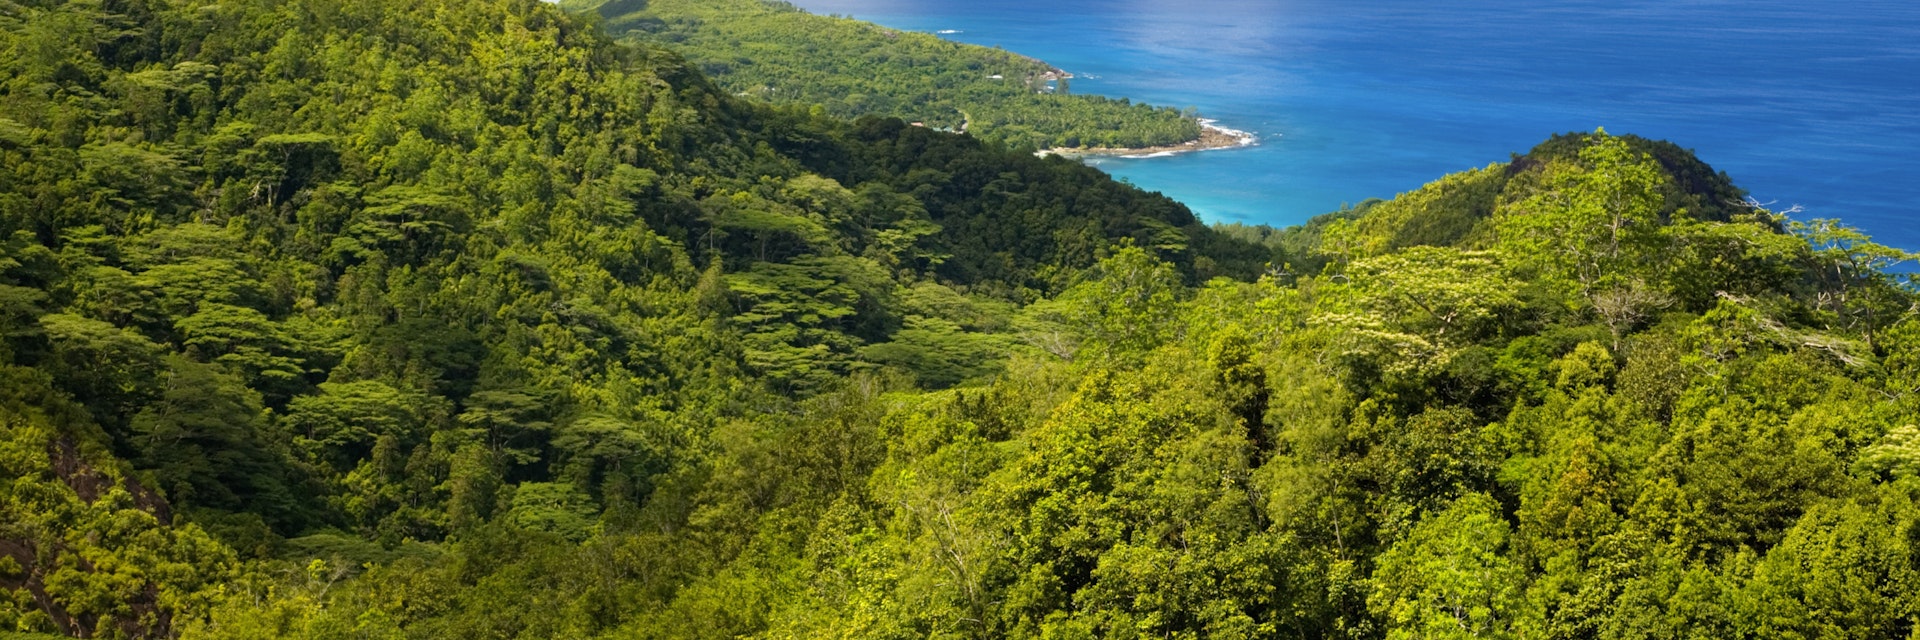 View south from the Mission, Mahe, Seychelles